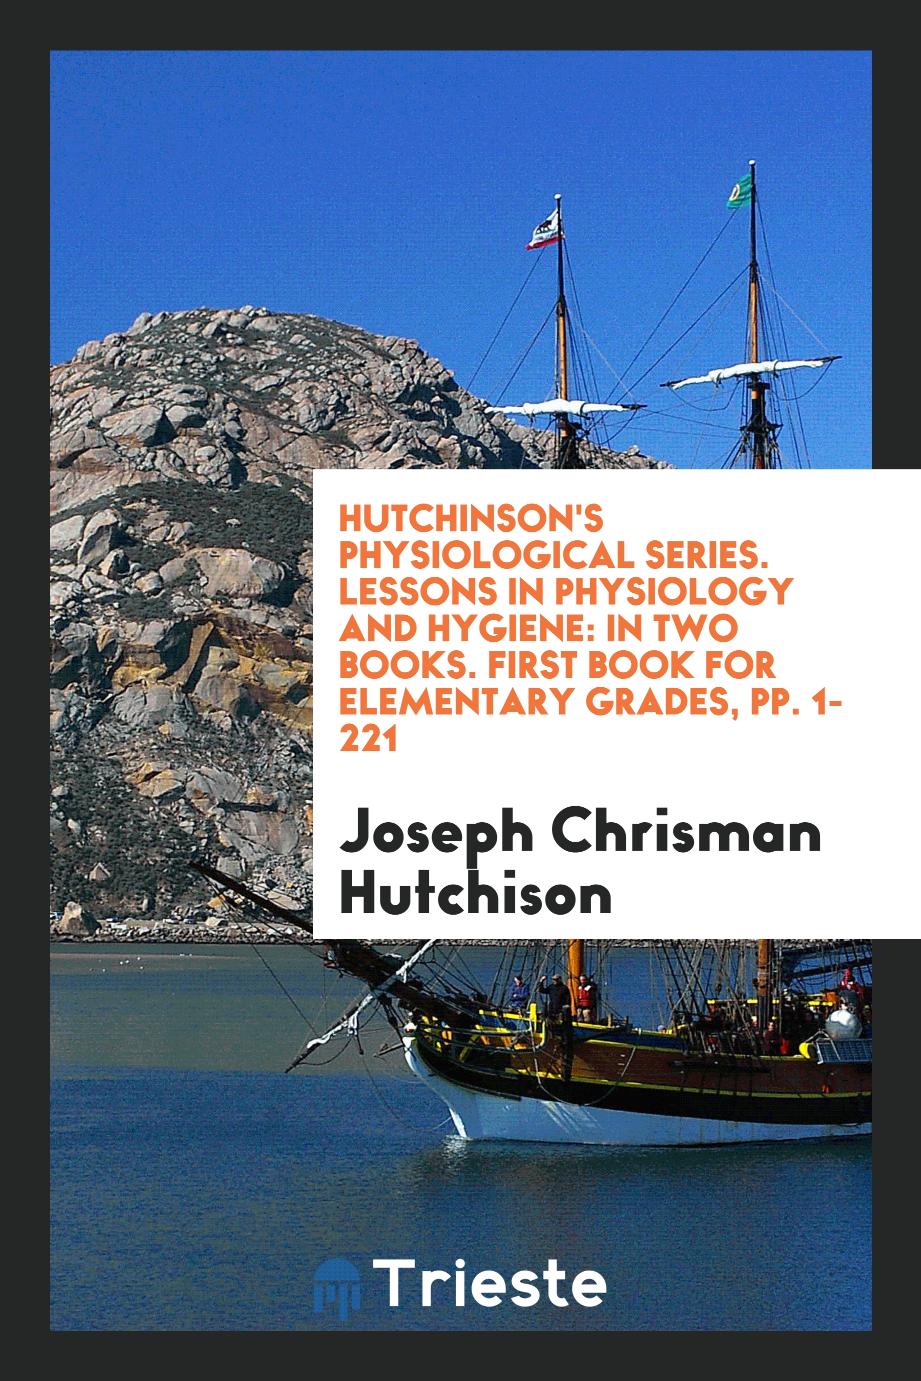 Hutchinson's Physiological Series. Lessons in Physiology and Hygiene: In Two Books. First Book for Elementary Grades, pp. 1-221